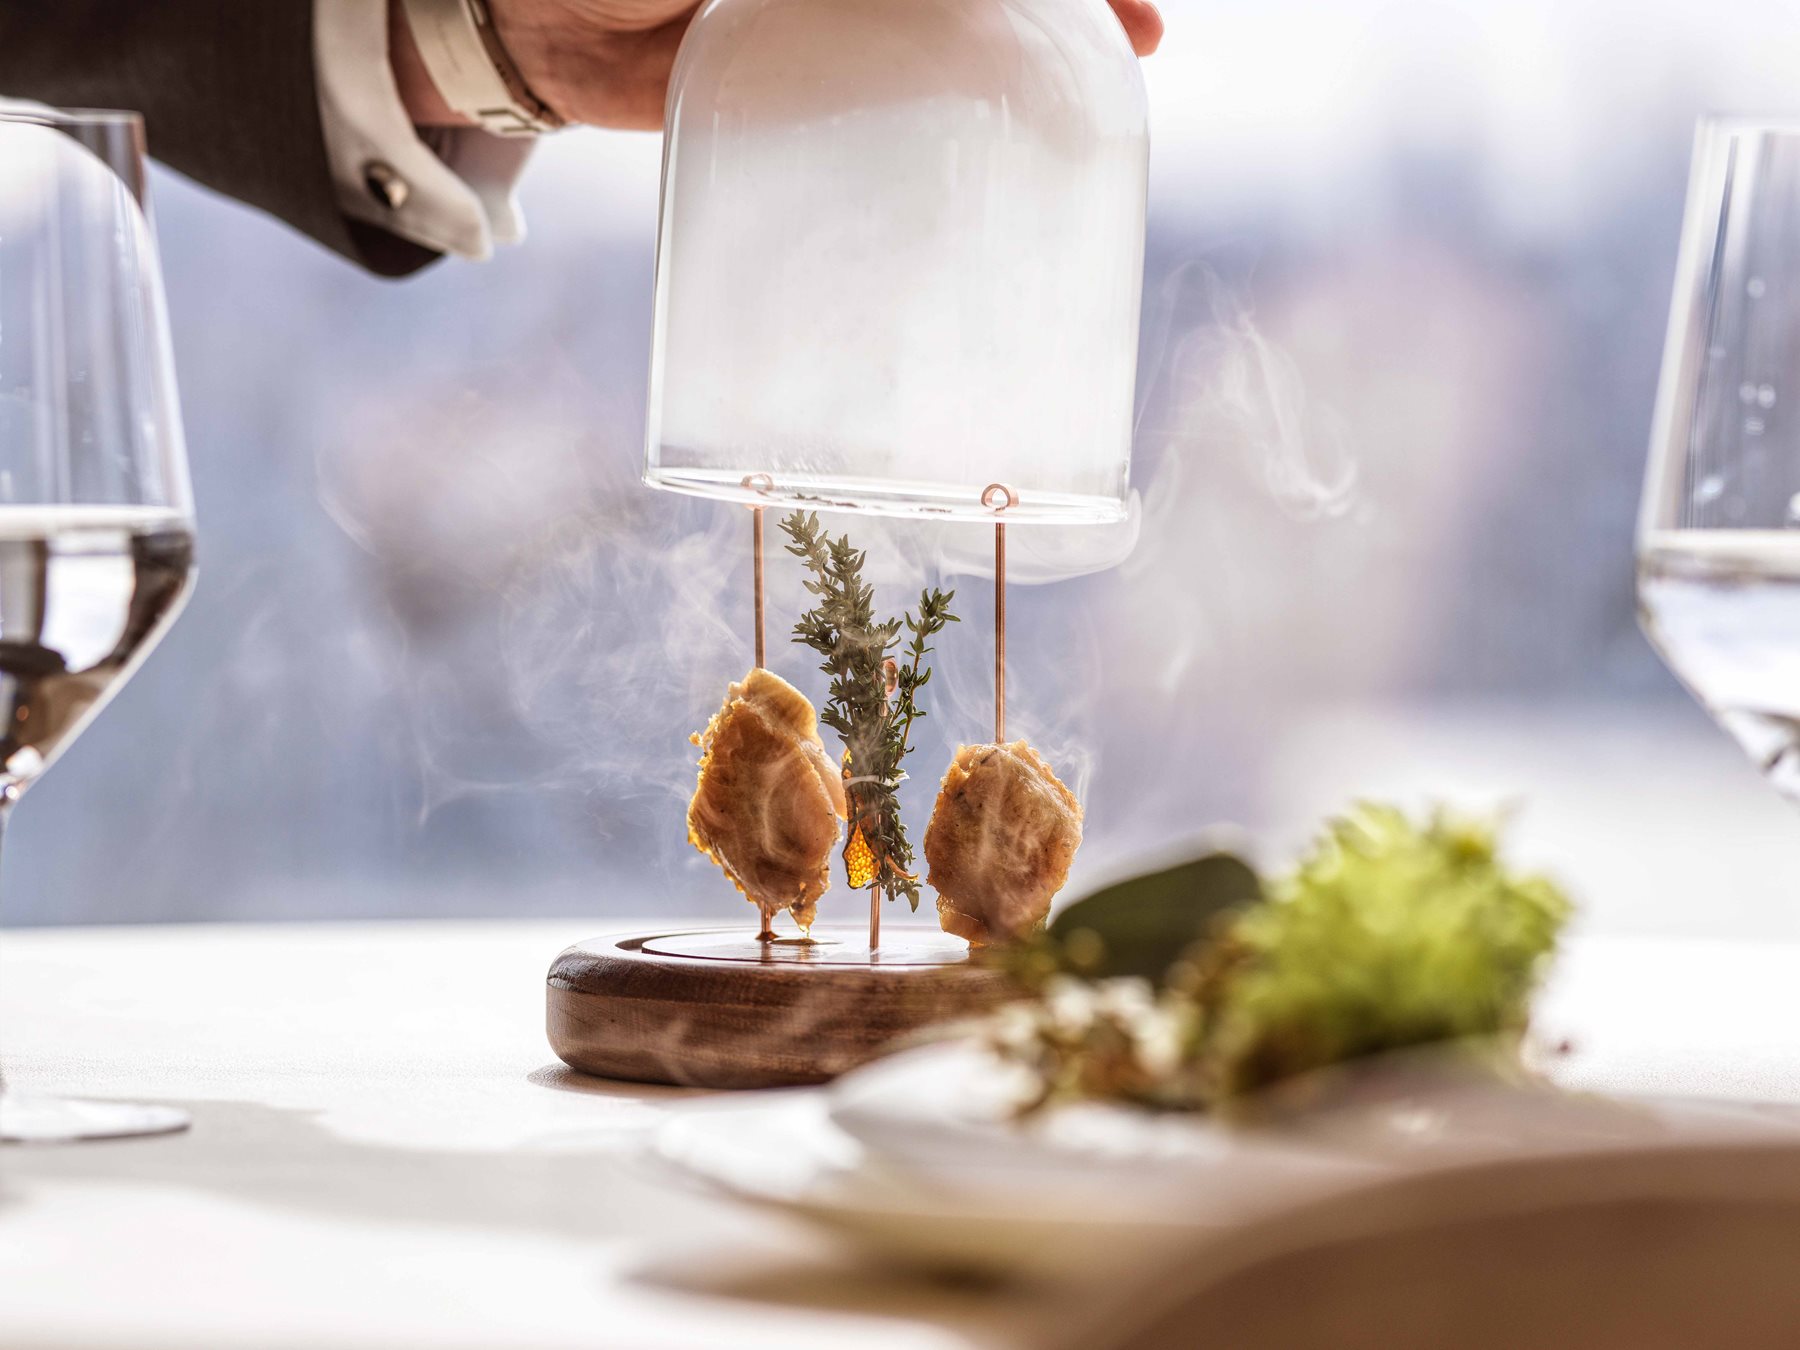 Special Entrée's, encased in a glass with steam billowing out
